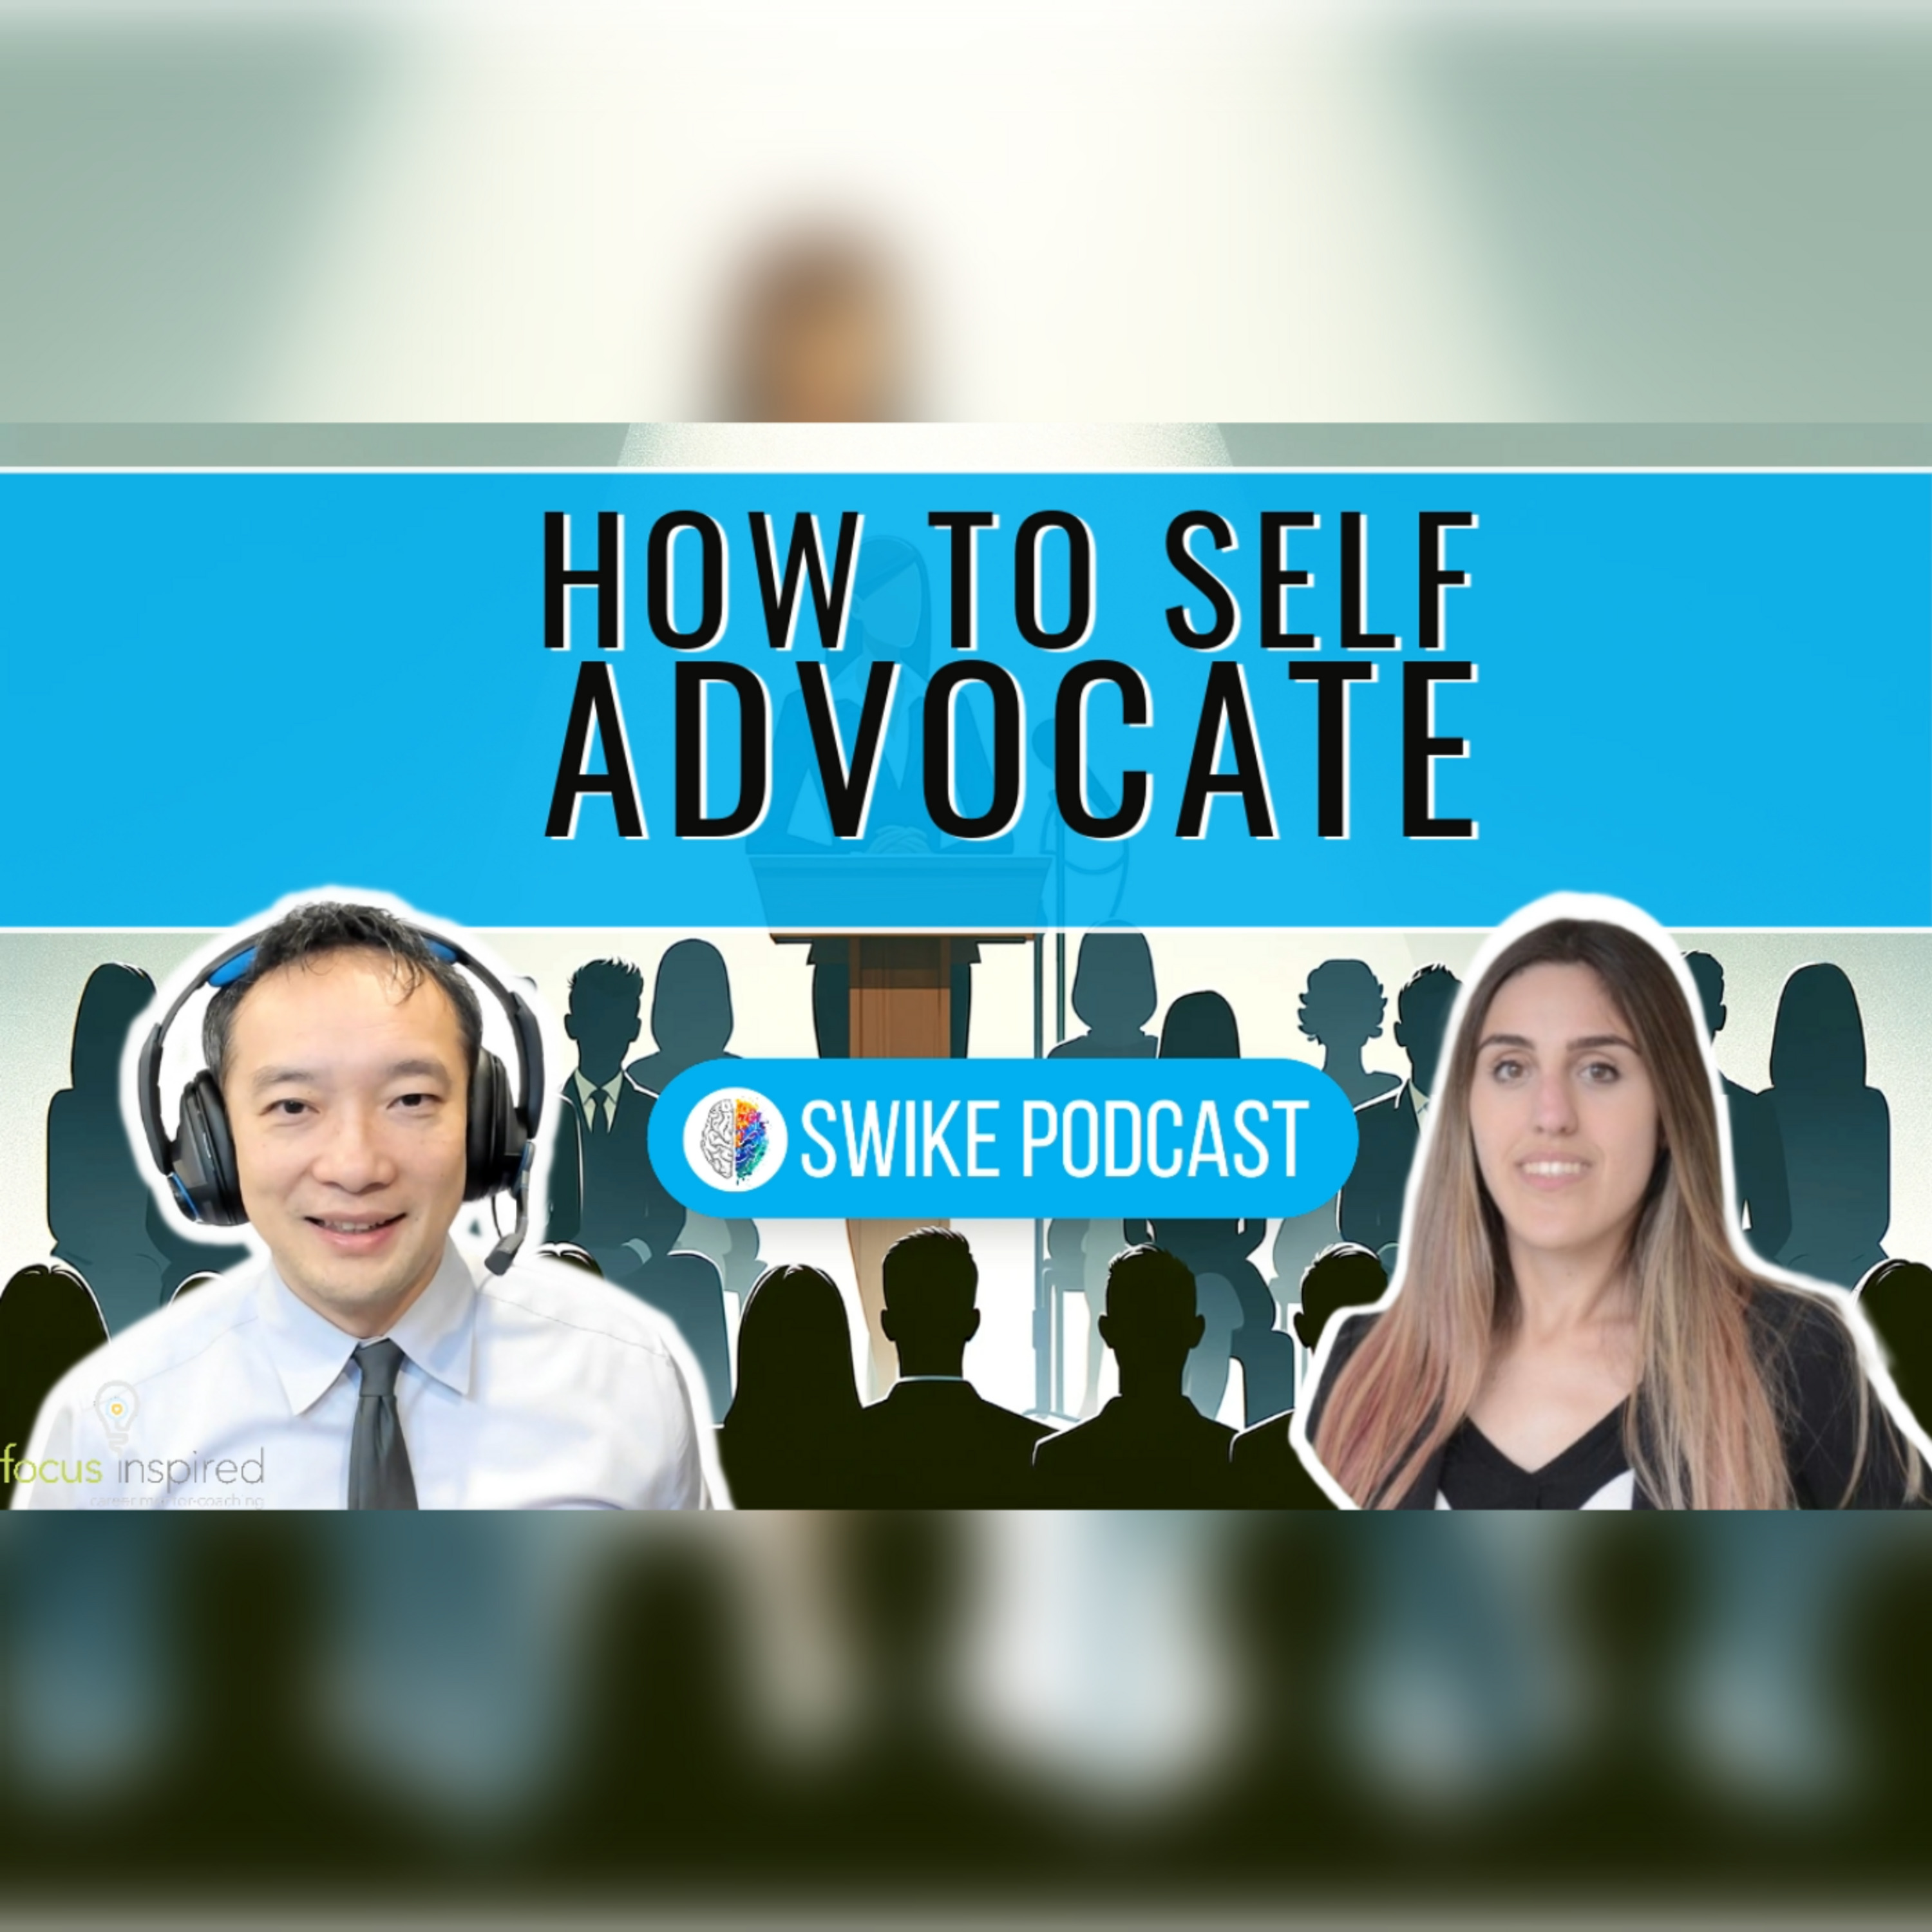 How to self advocate | SIWIKE Podcast | Cindy Vieria (CV-001)